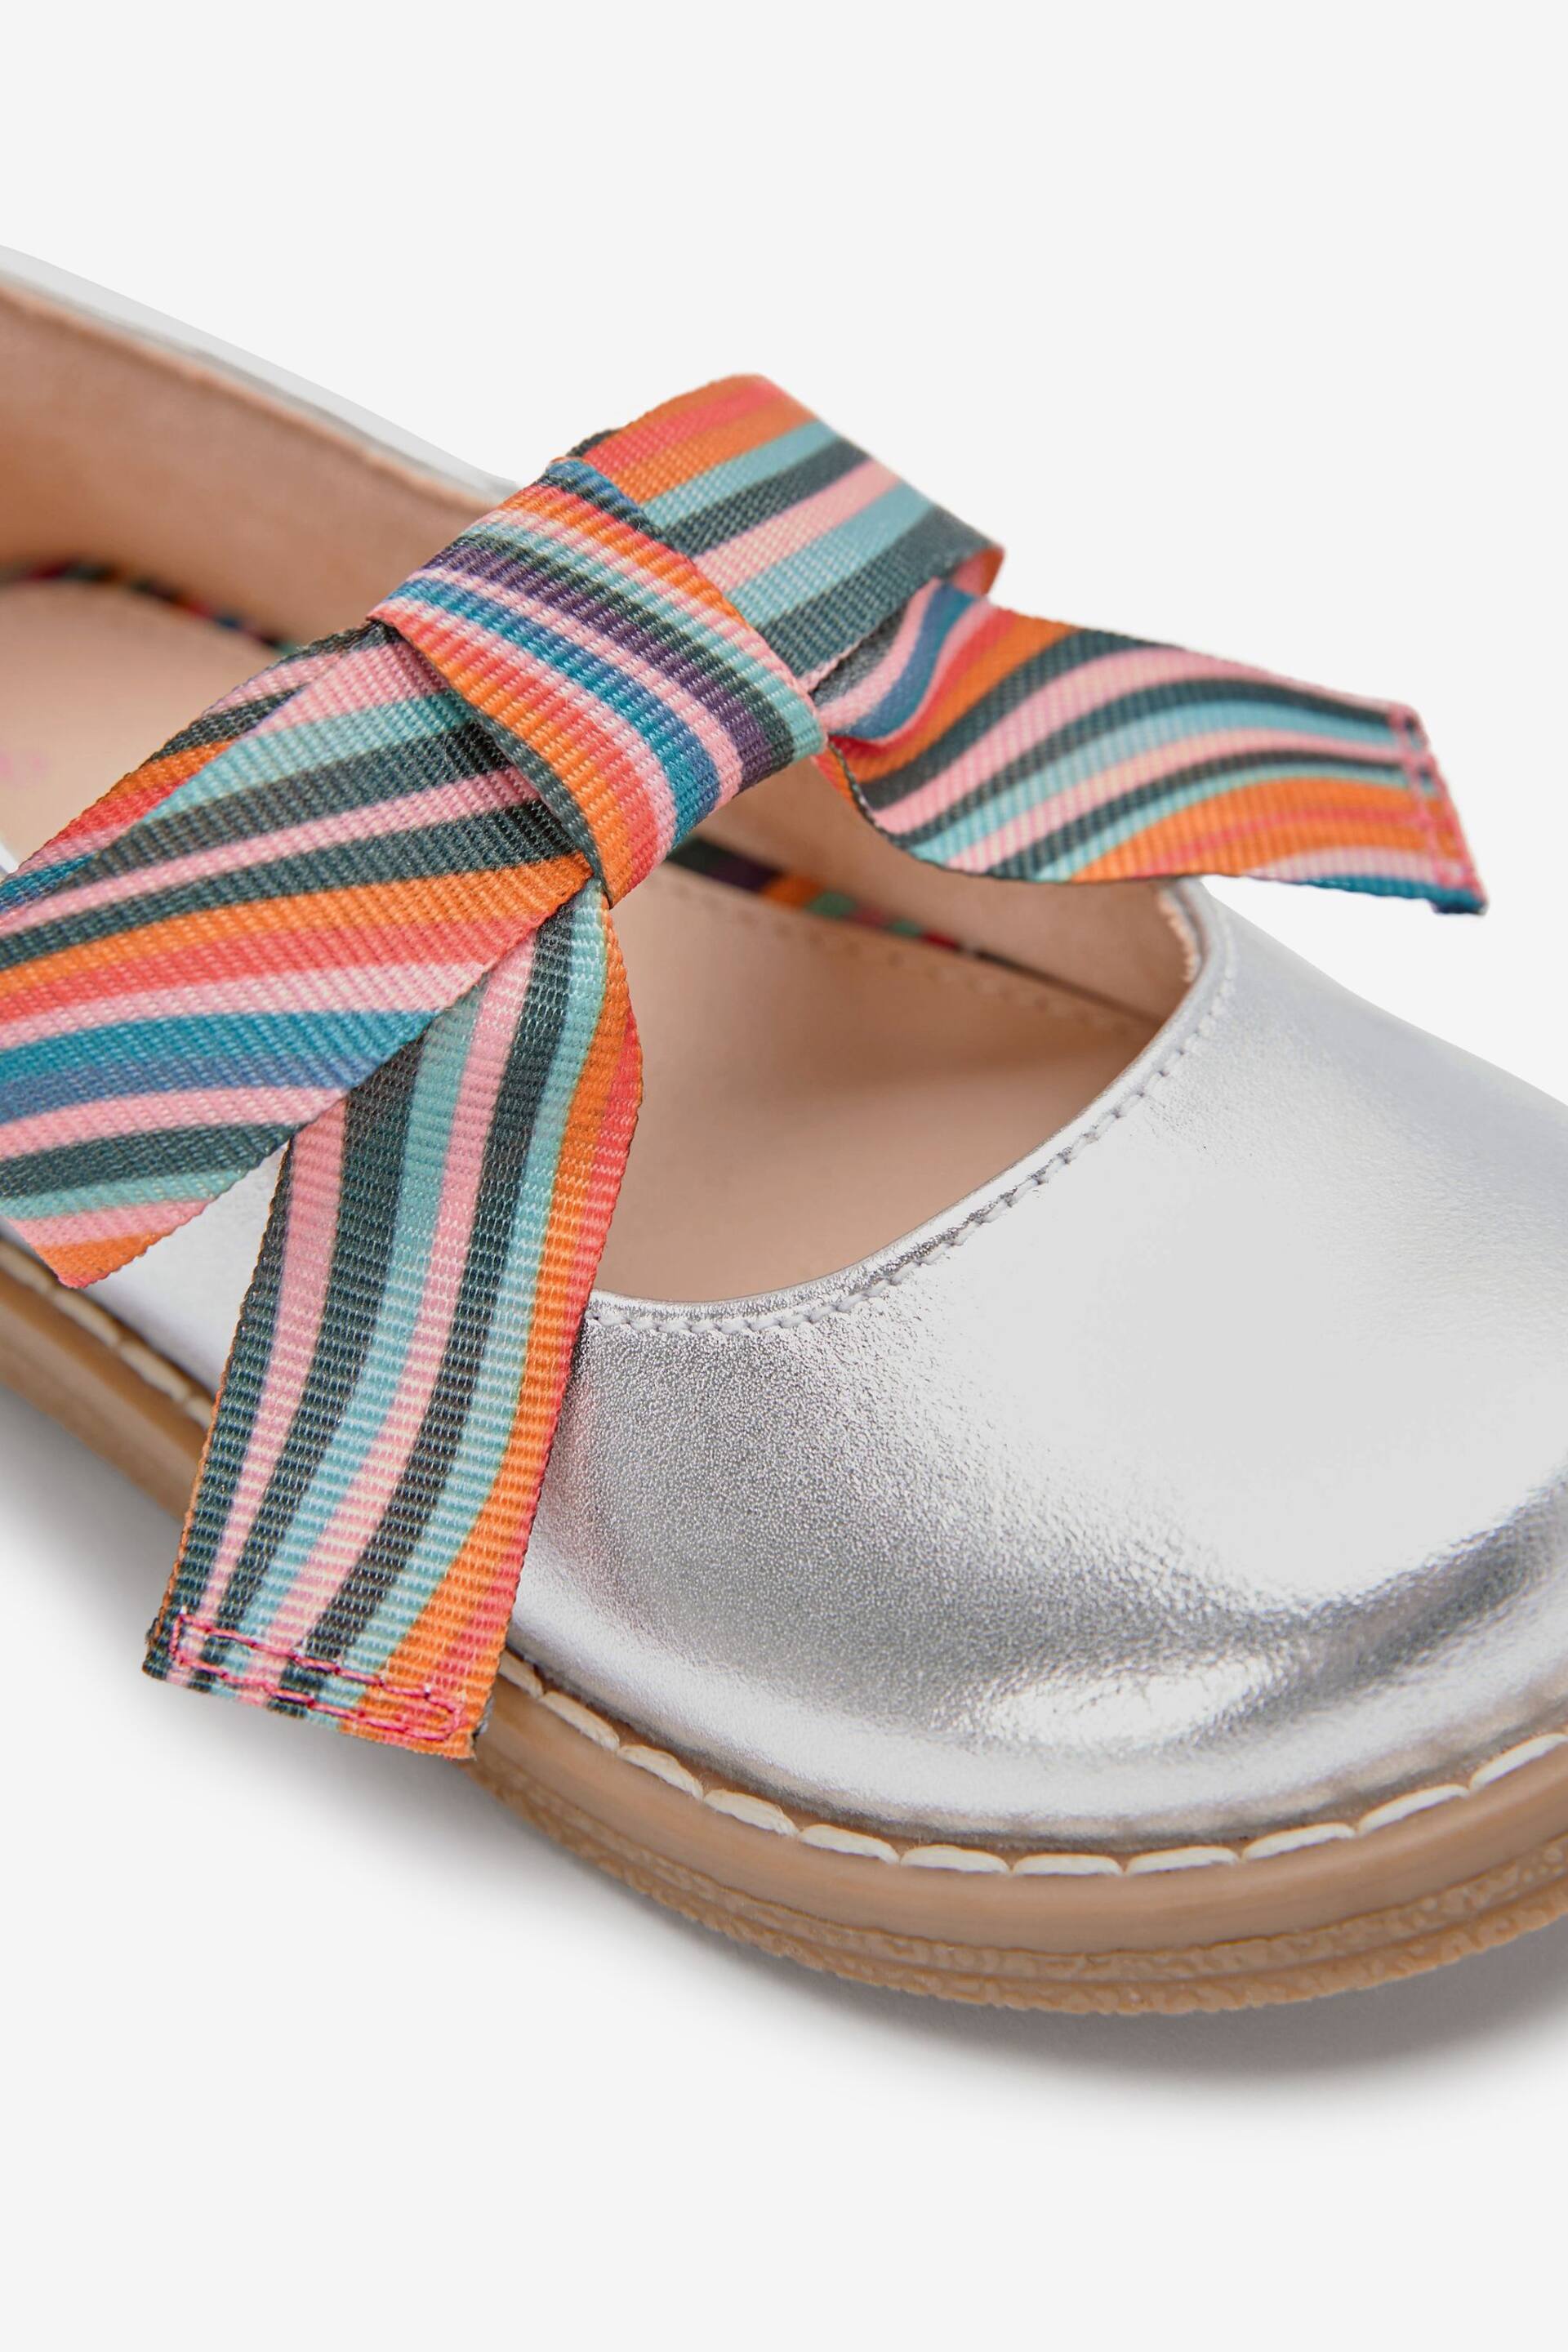 Paul Smith Junior Girls Silver Mary Jane 'Artist Swirl' Bow Shoes - Image 4 of 5